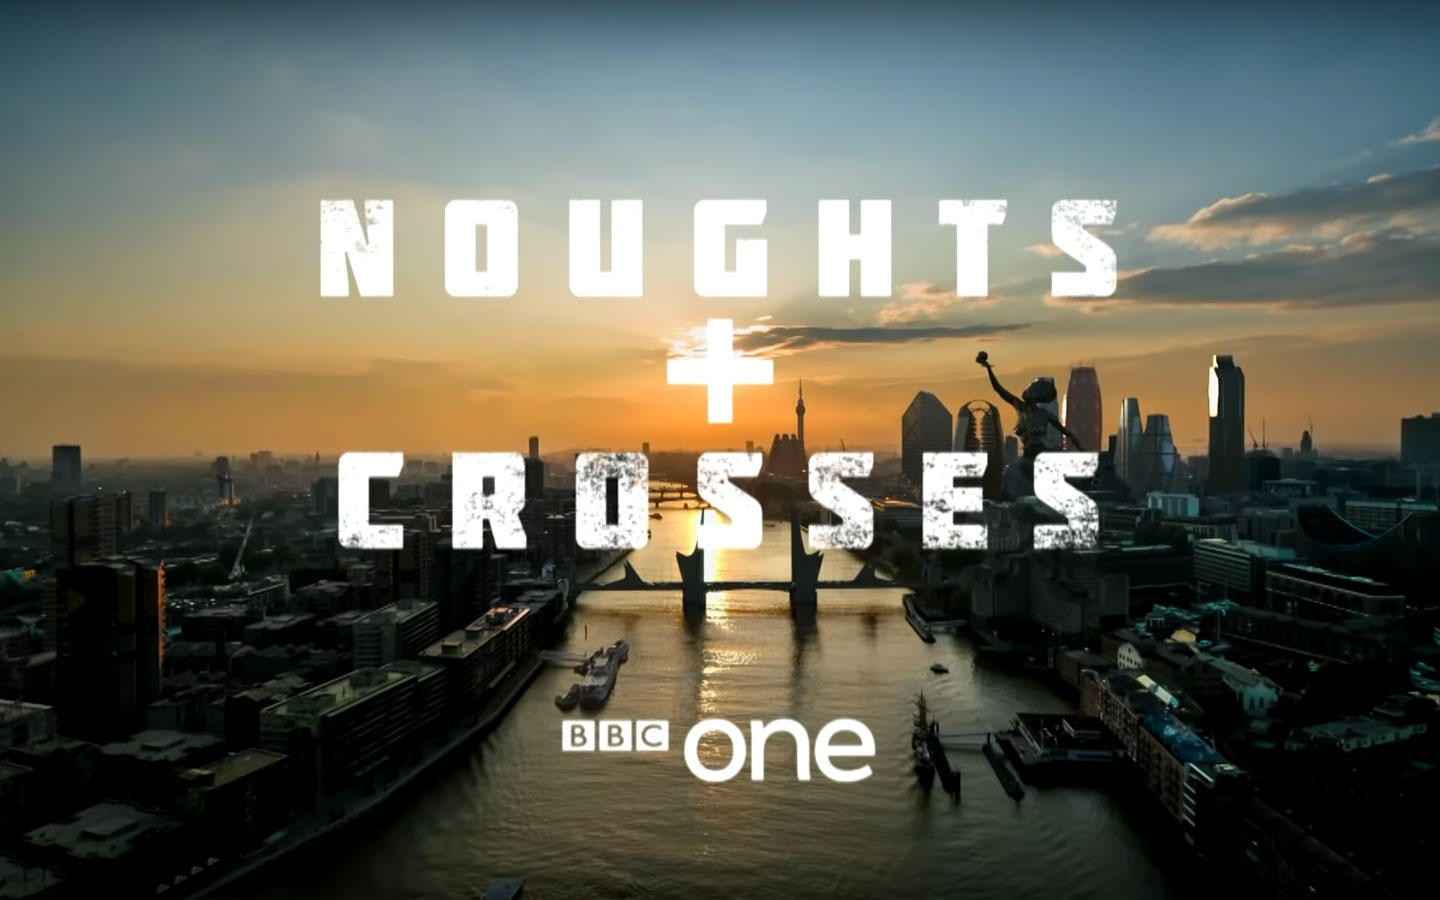 Brand new drama ‘Noughts + Crosses’ with Kike Brimah and Sudha Bhuchar coming to BBC in March